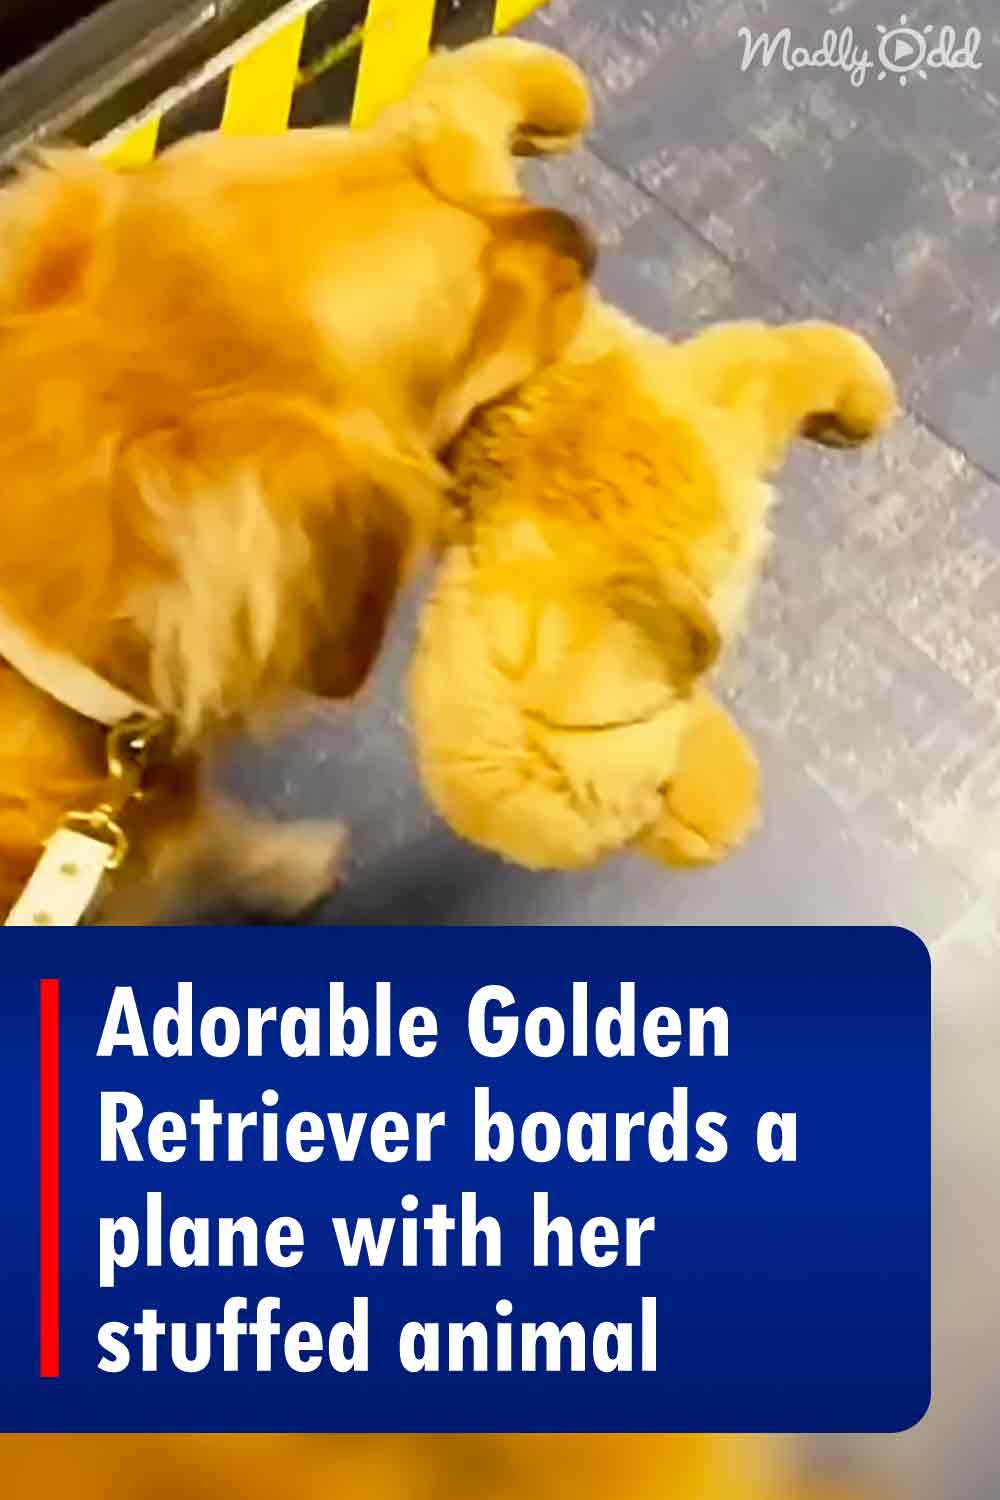 Adorable Golden Retriever boards a plane with her stuffed animal